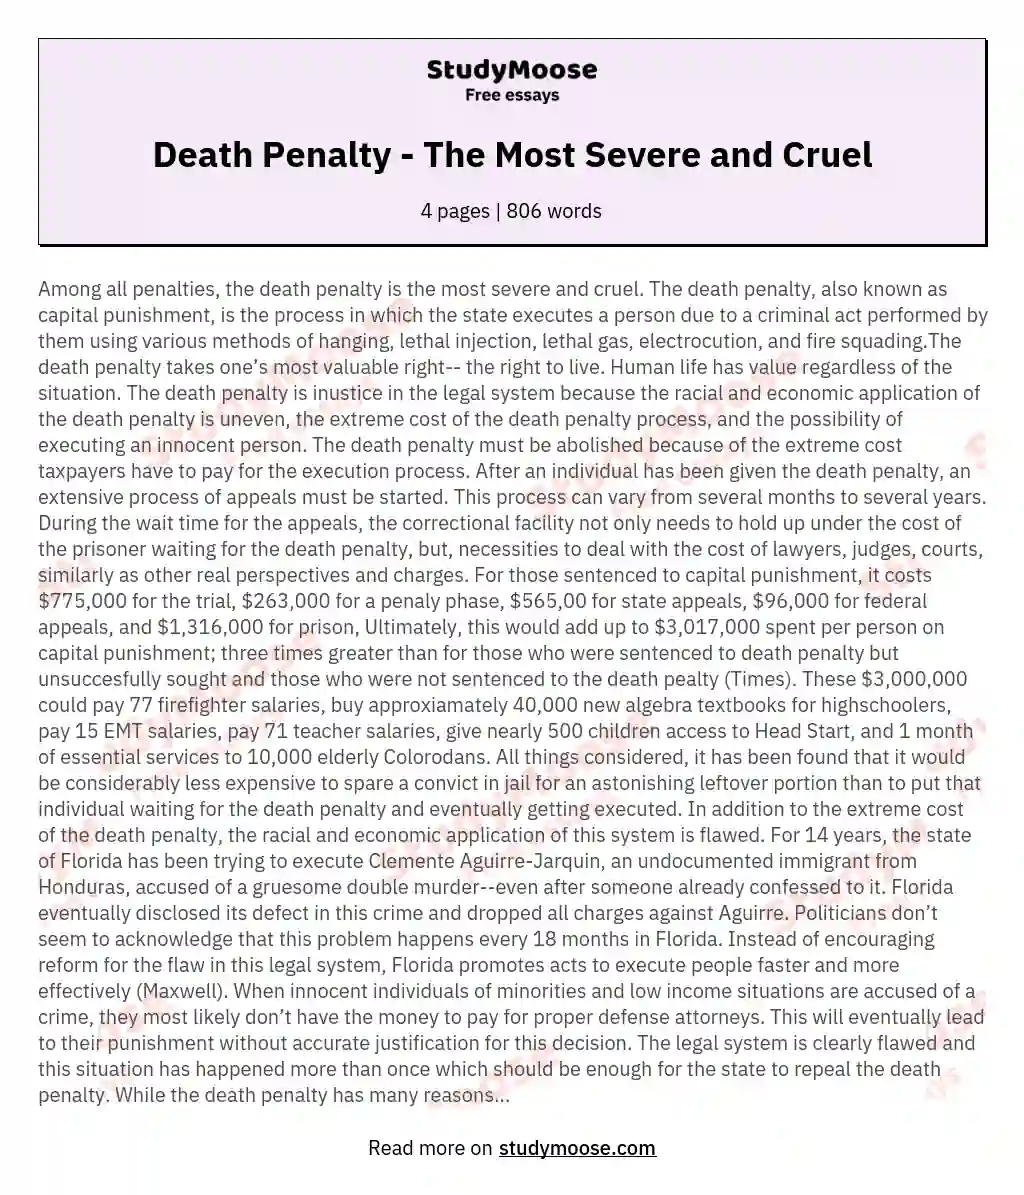 Death Penalty - The Most Severe and Cruel essay